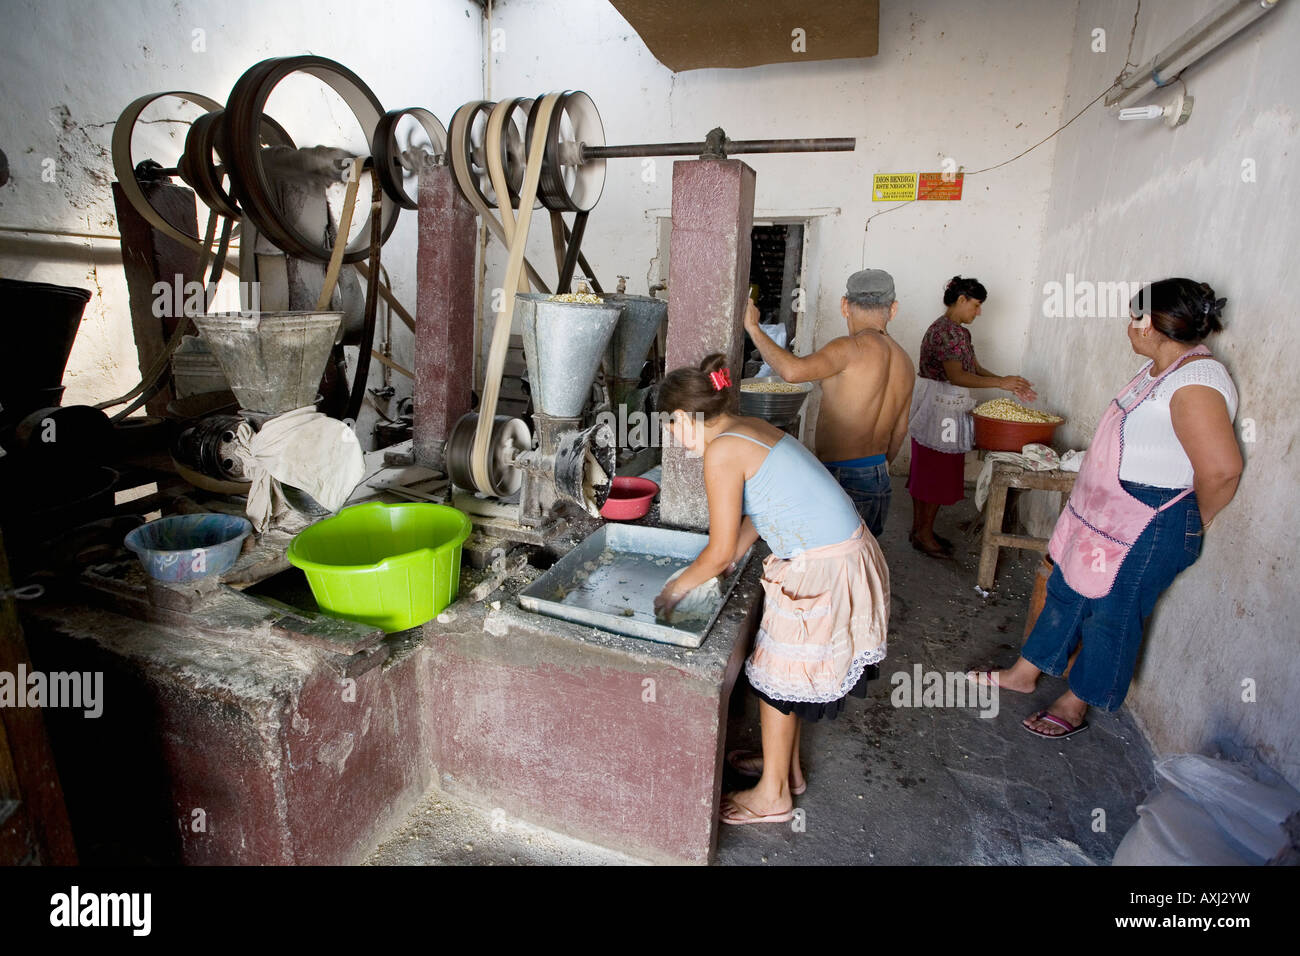 Women grinding grain into flour at a community molina aka mill in Suchitoto El Salvador while mechanic tends belts and pulleys Stock Photo